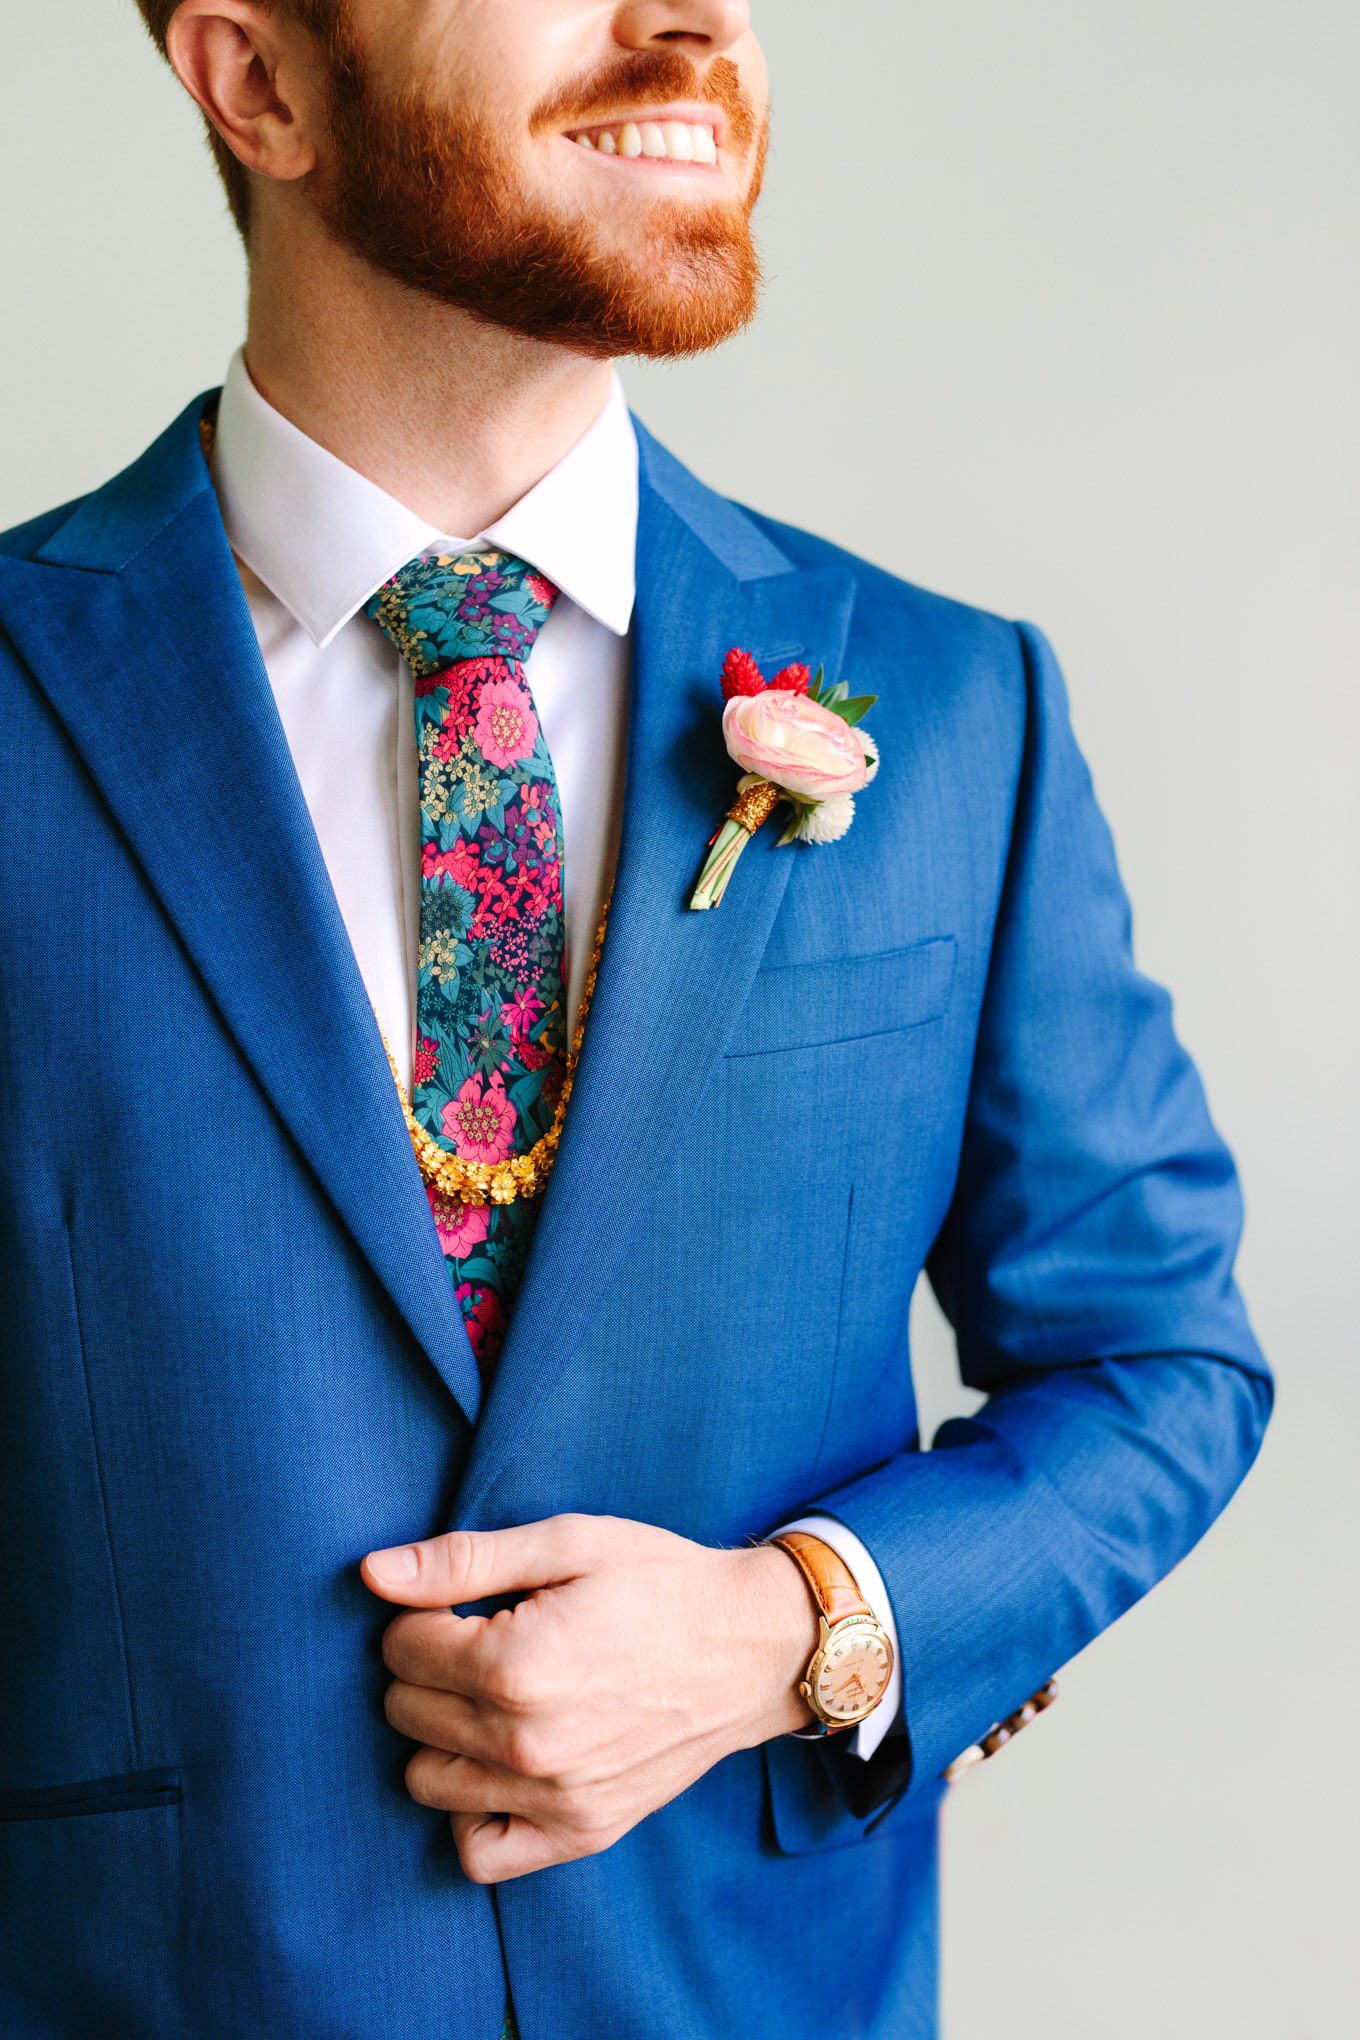 Bright blue suit jacket detail with OTAA tie and gold necklace. Two Disney artists create a unique and colorful Indian Fusion wedding at The Fig House Los Angeles, featured on Green Wedding Shoes. | Colorful and elevated wedding inspiration for fun-loving couples in Southern California | #indianwedding #indianfusionwedding #thefighouse #losangeleswedding   Source: Mary Costa Photography | Los Angeles